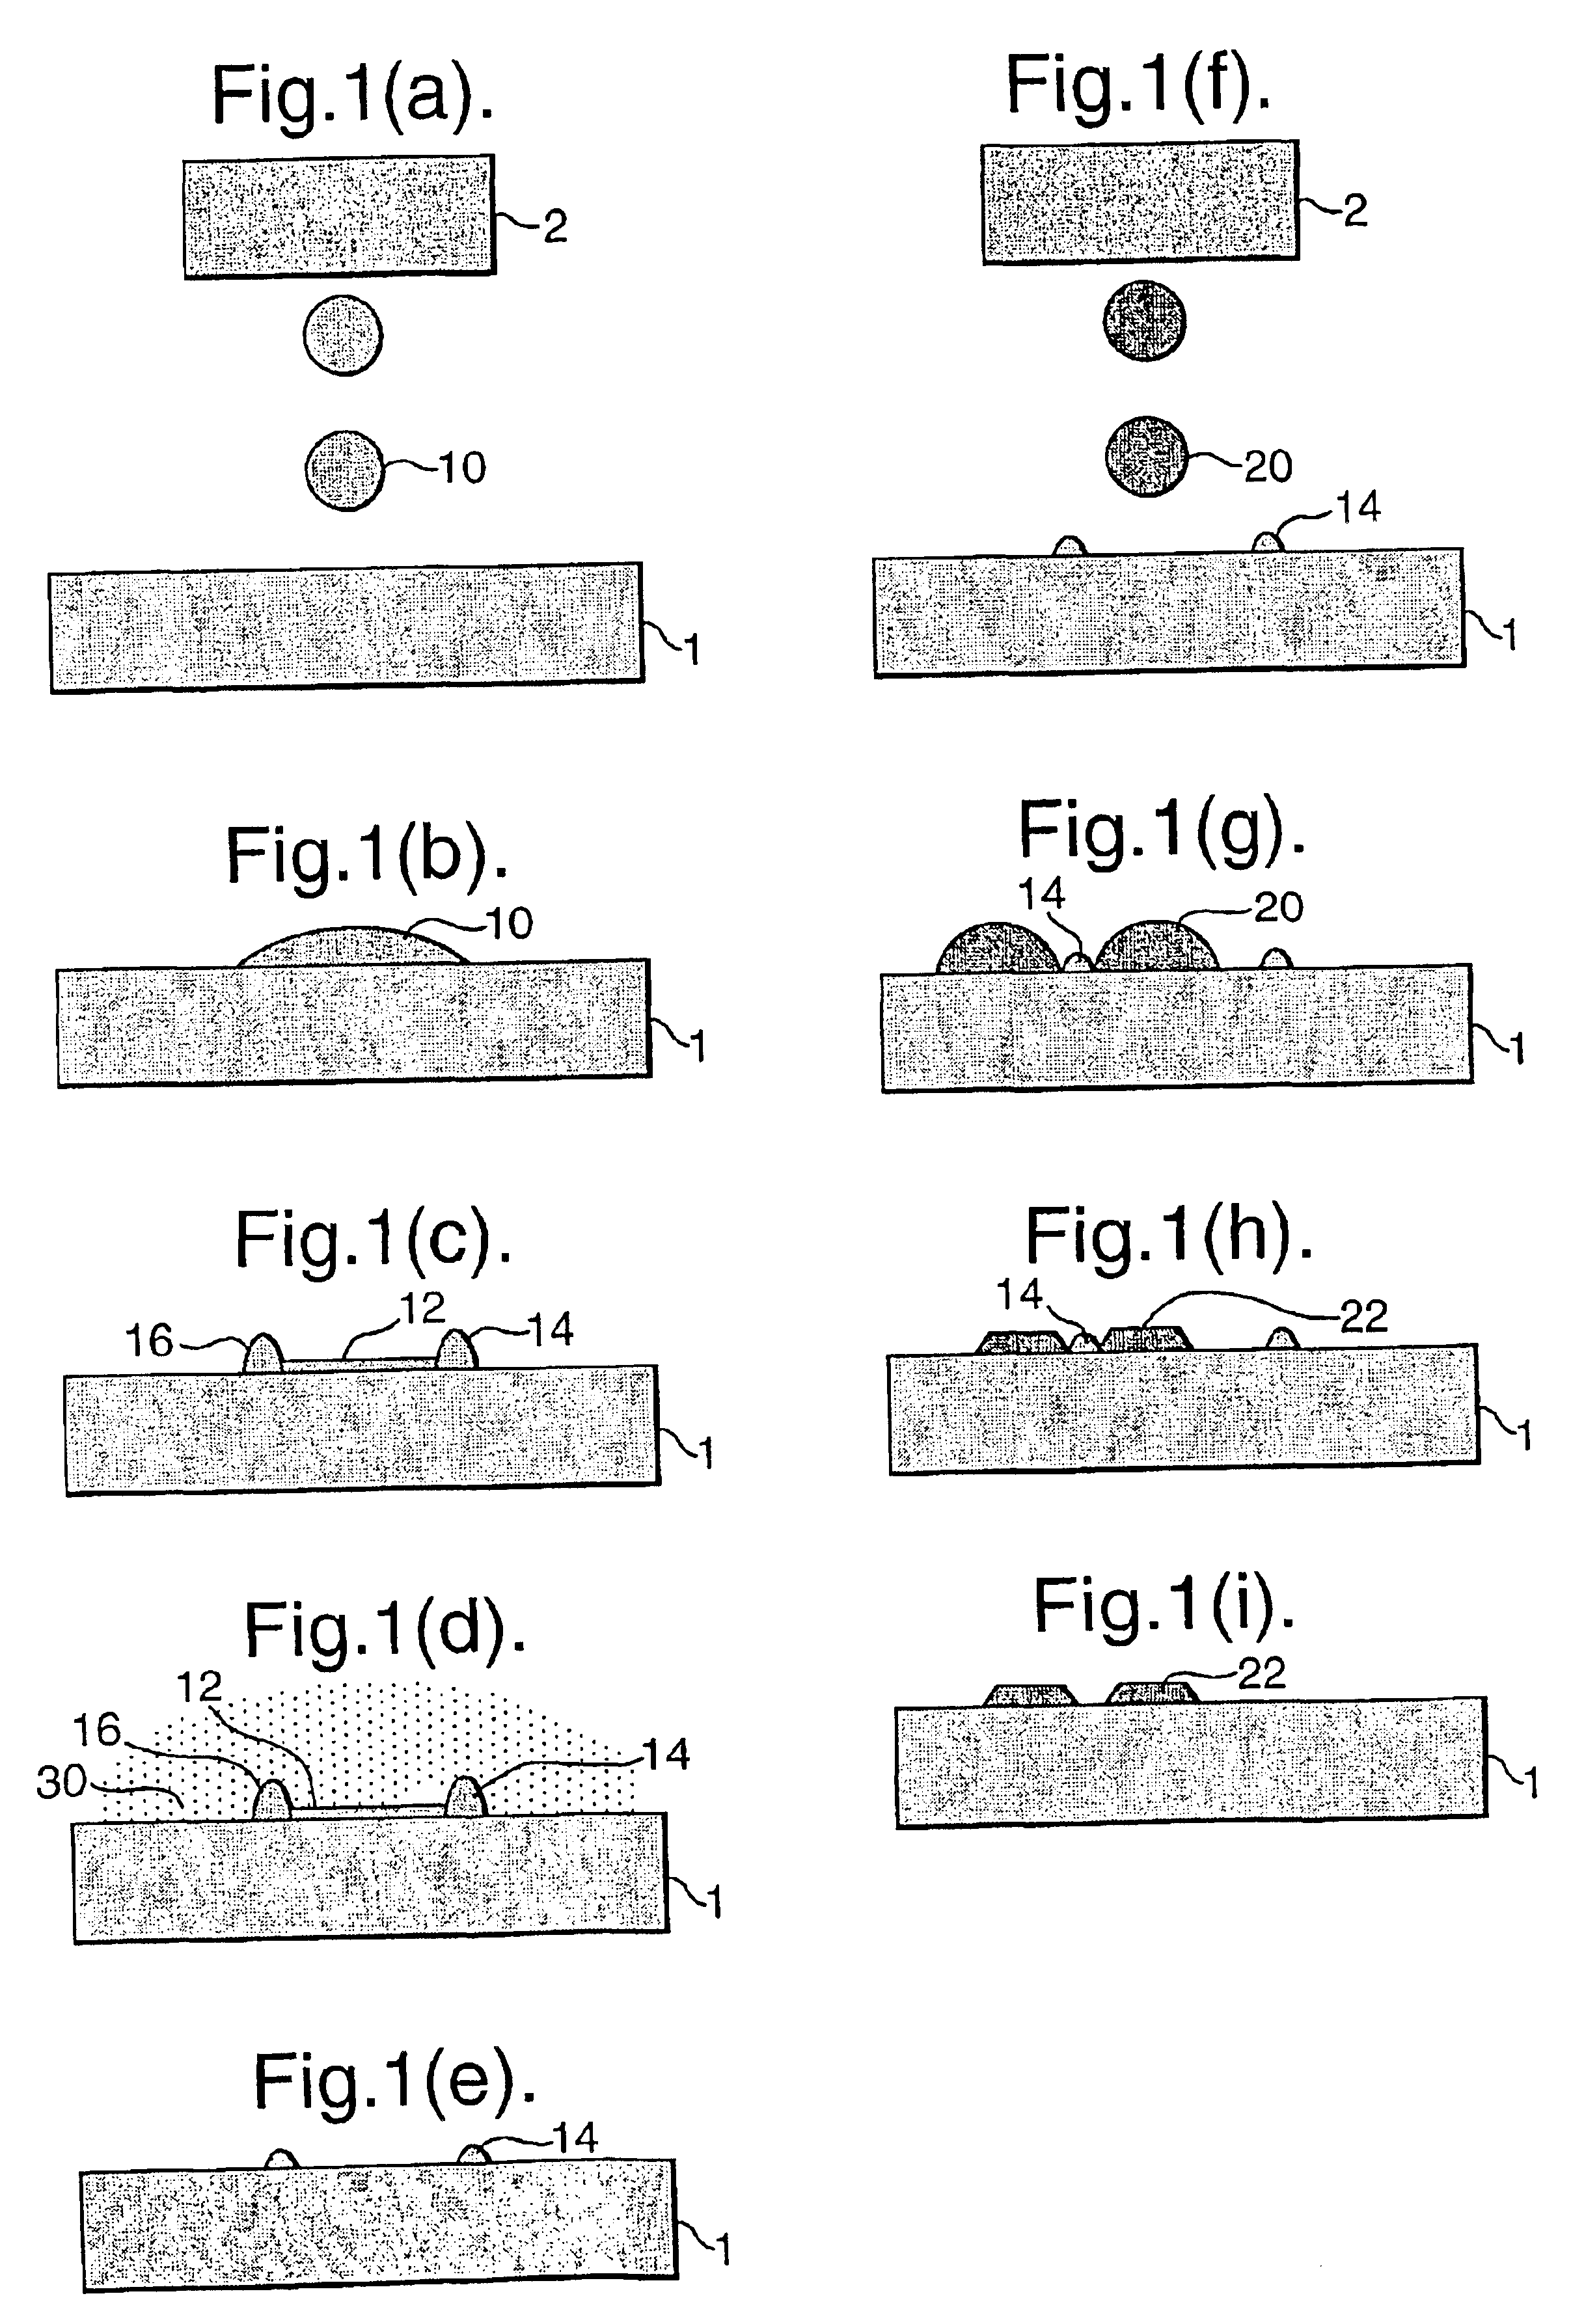 Method of patterning a substrate